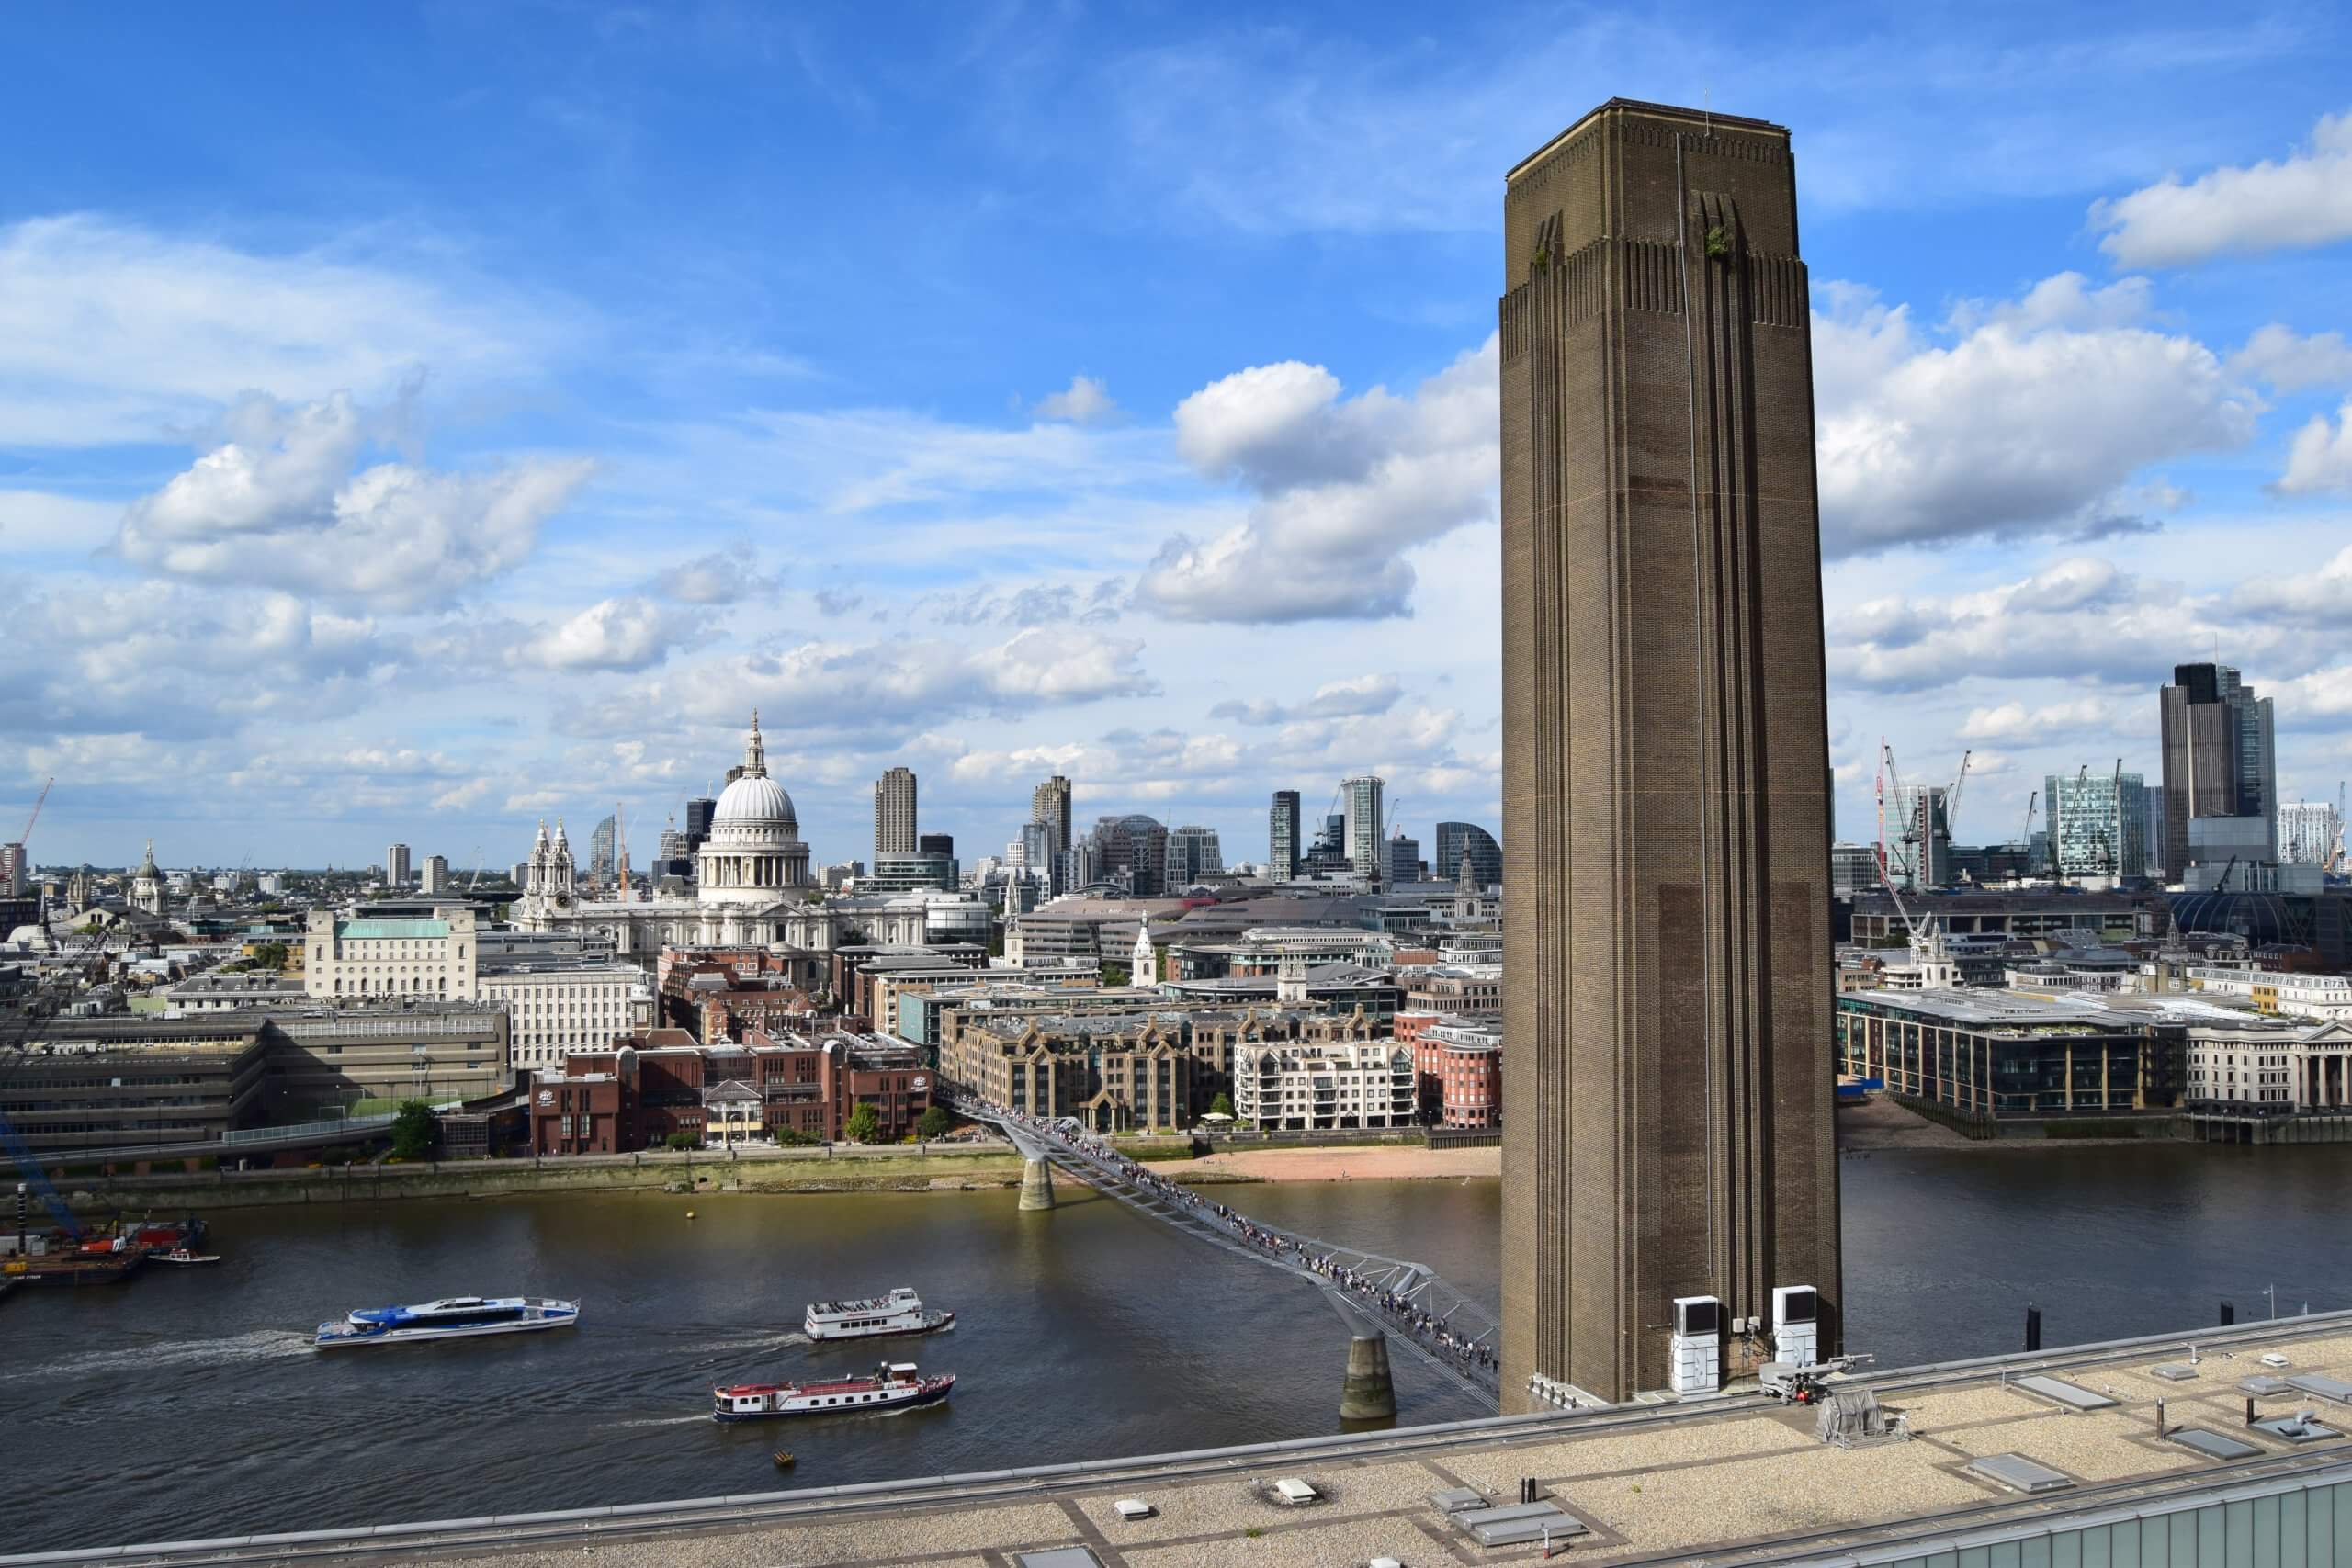 A view of the centre of London that shows the river and the Tate Modern